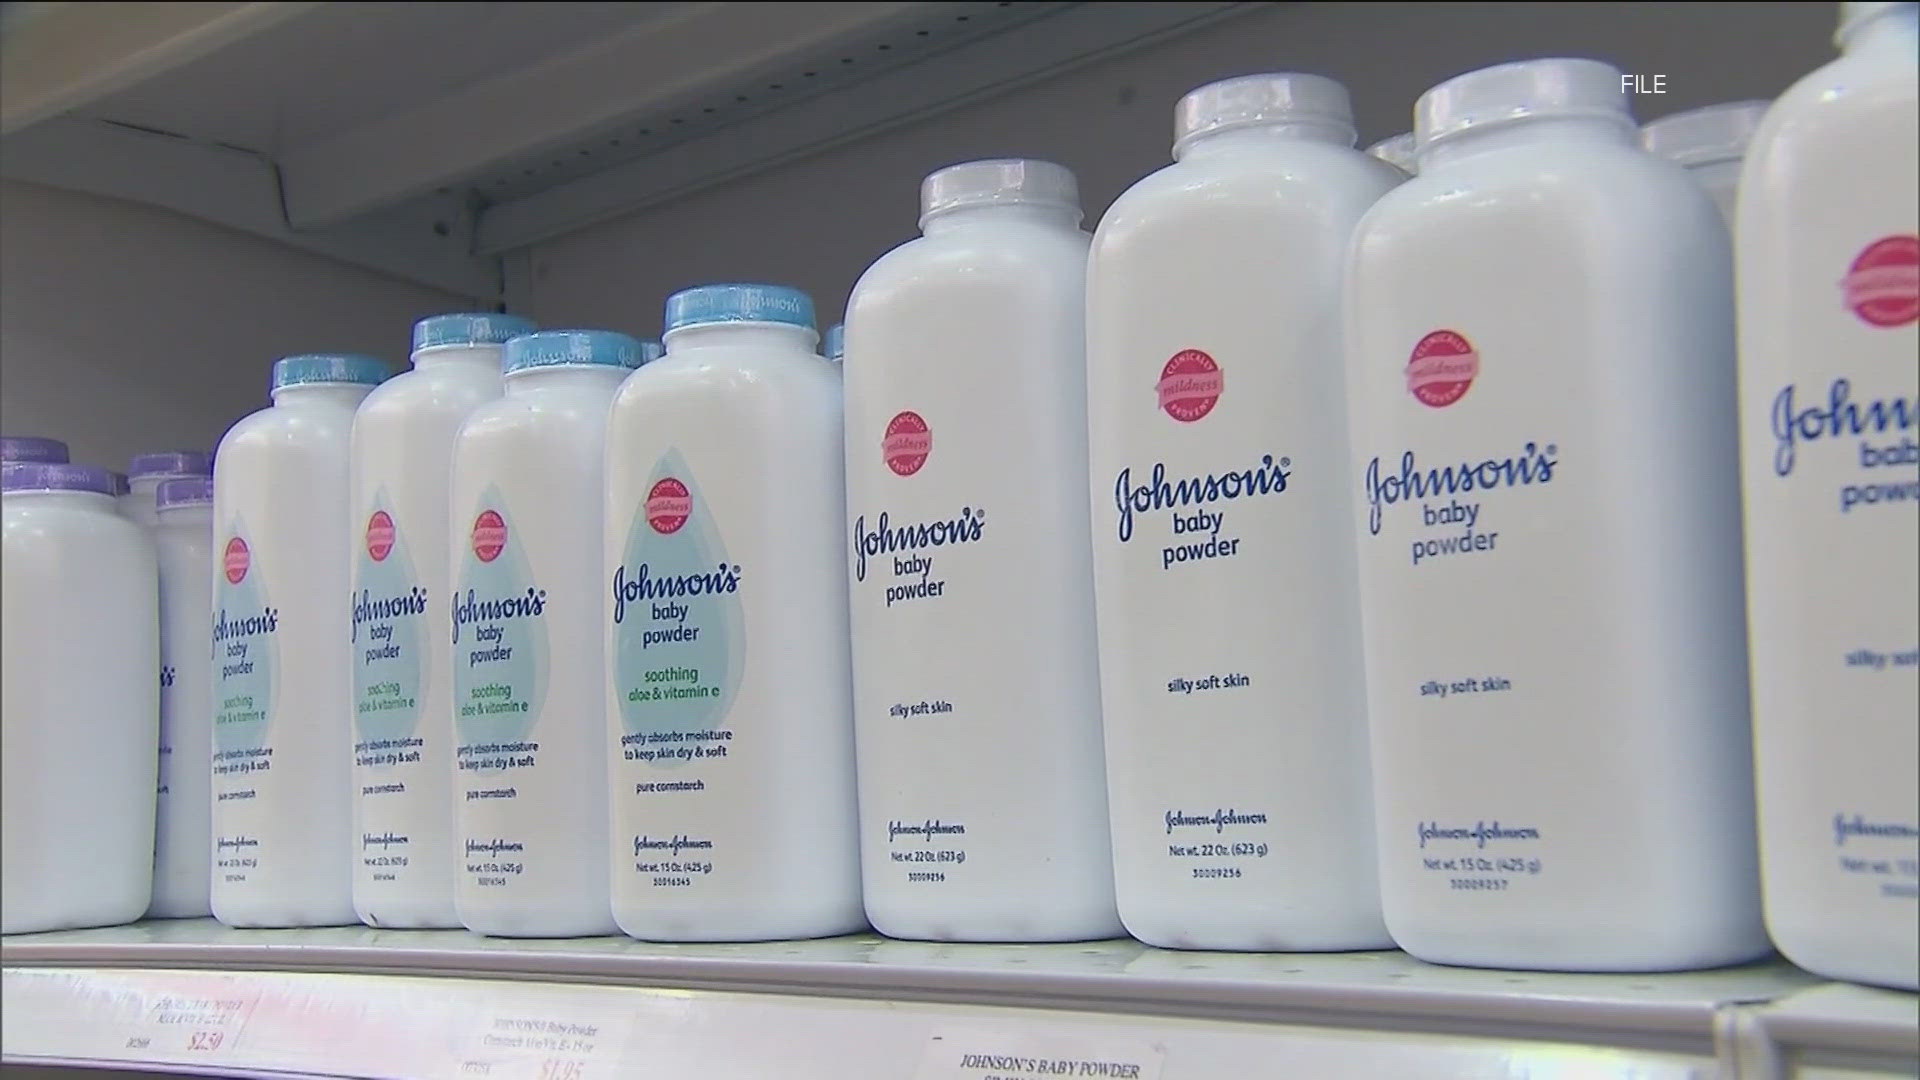 Johnson & Johnson will pay $700 million in a settlement over misleading users about the safety of its talcum powder. More than 50,000 claims have been filed.